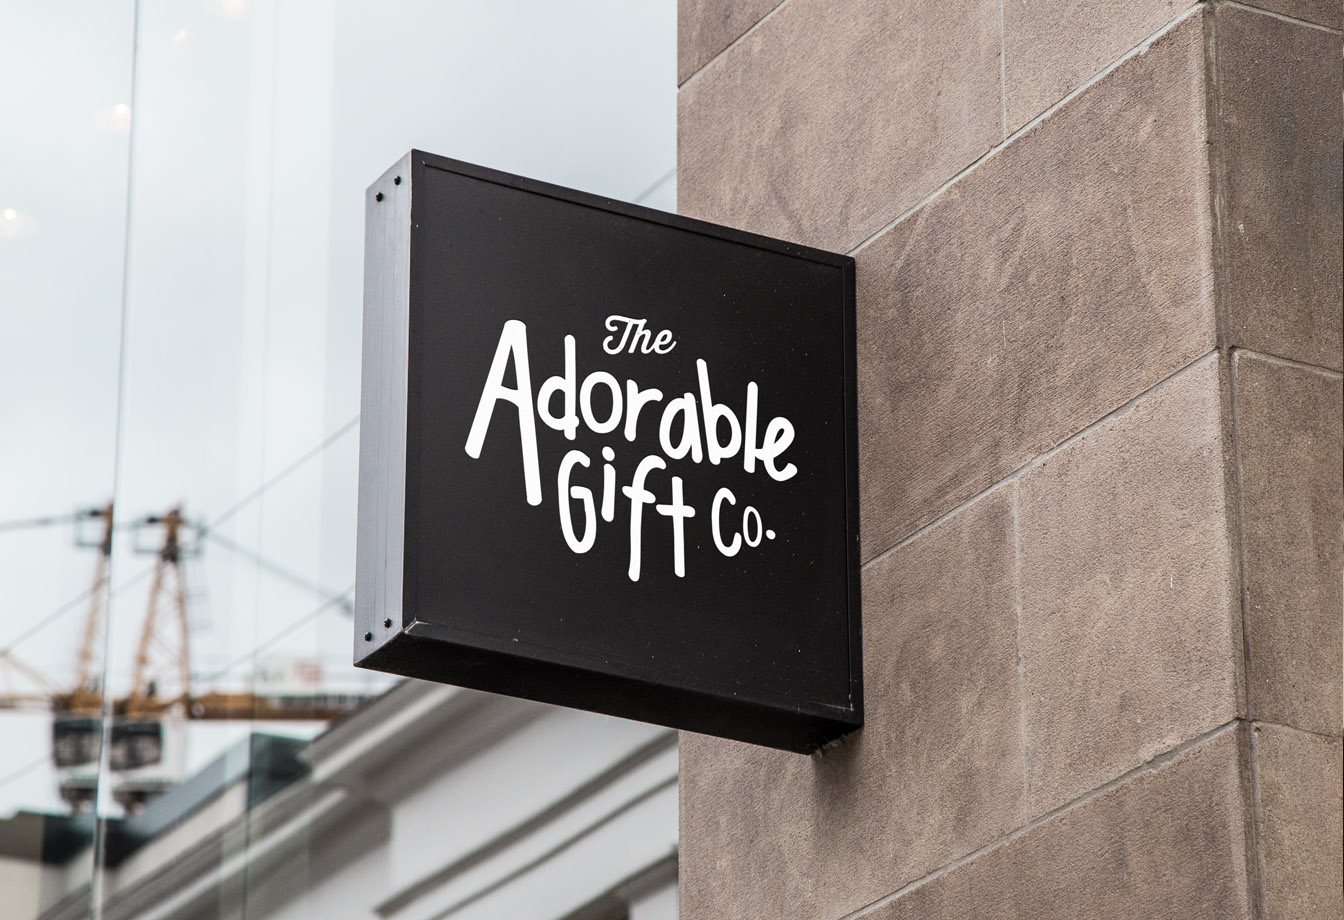 Adorable Gift Co Signage